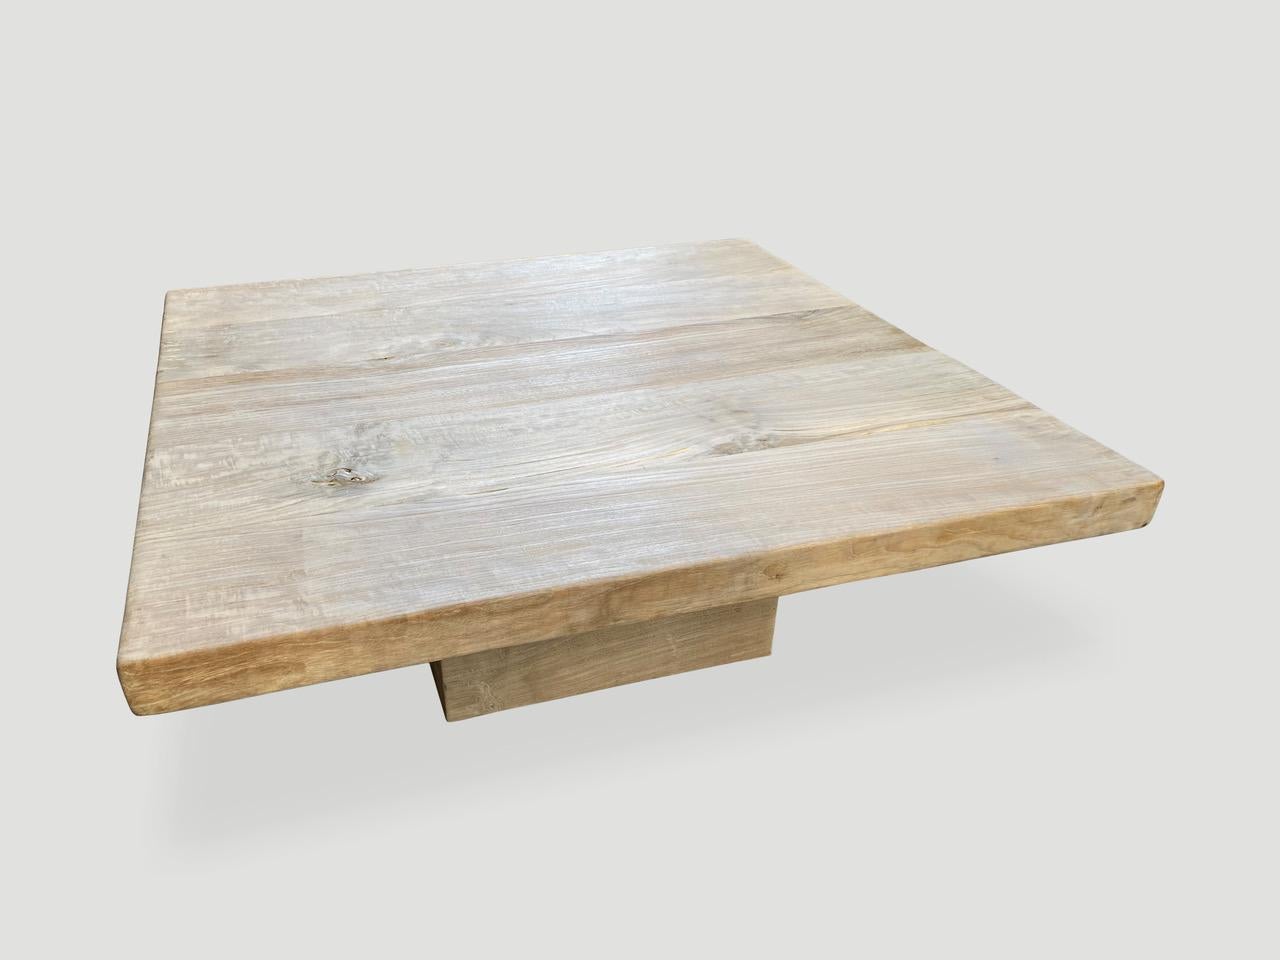 Beautiful bleached reclaimed teak wood coffee table with a fine white wash finish. We added butterfly inlays into the wood to join the 2.5” thick teak slabs for this impressive coffee table.

The St. Barts Collection features an exciting new line